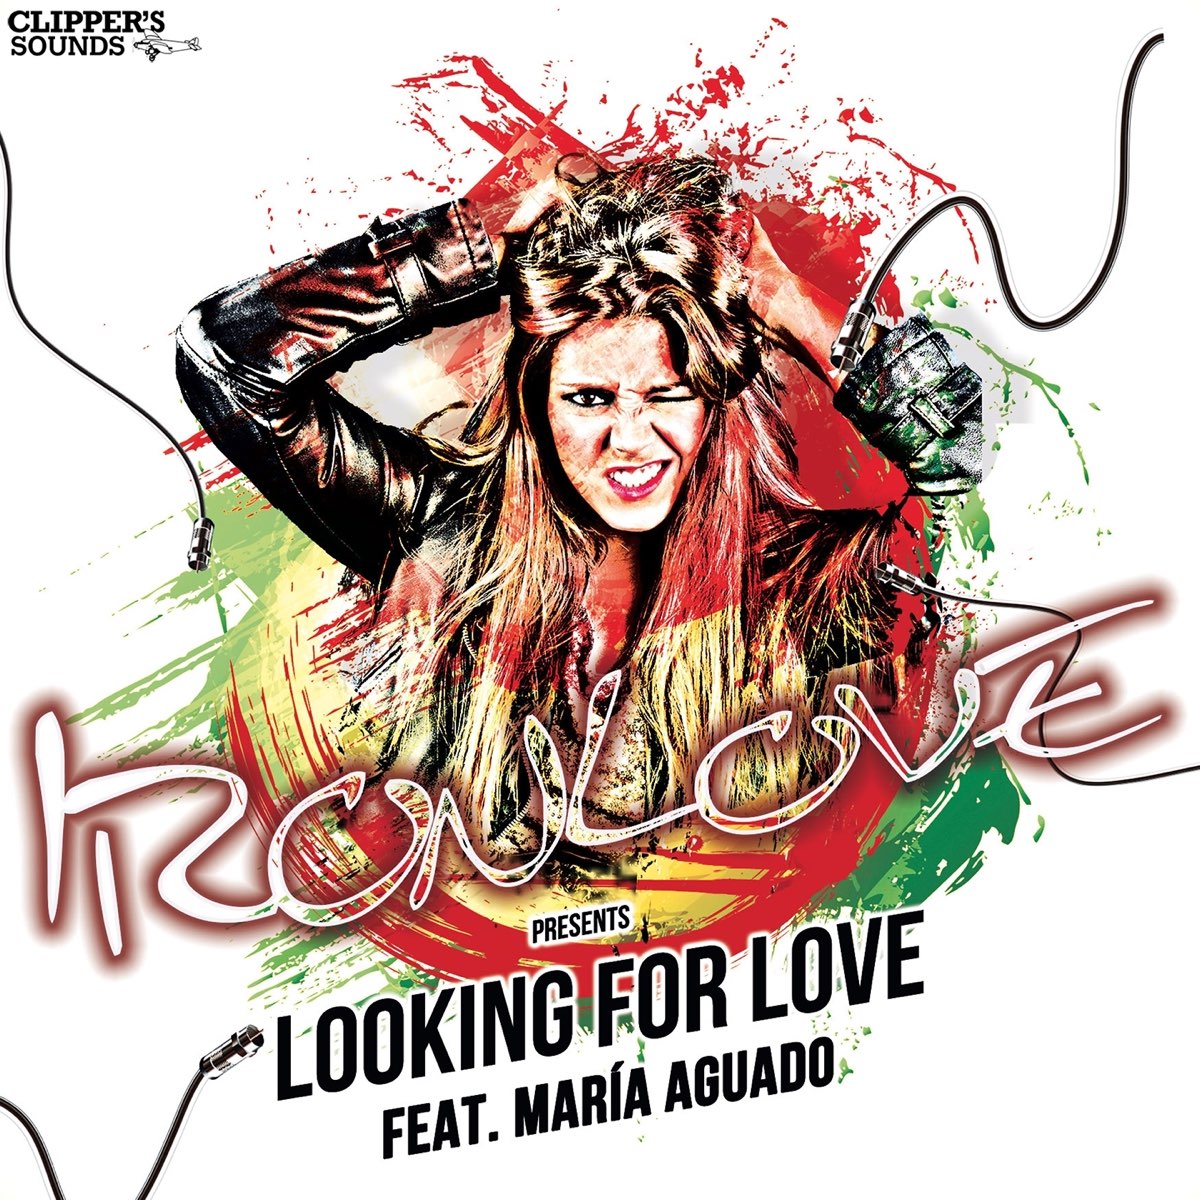 Maria ft. Looking for Love. Zinatra - looking for Love. Maria Maria (feat. The product g&b) [Sped up].